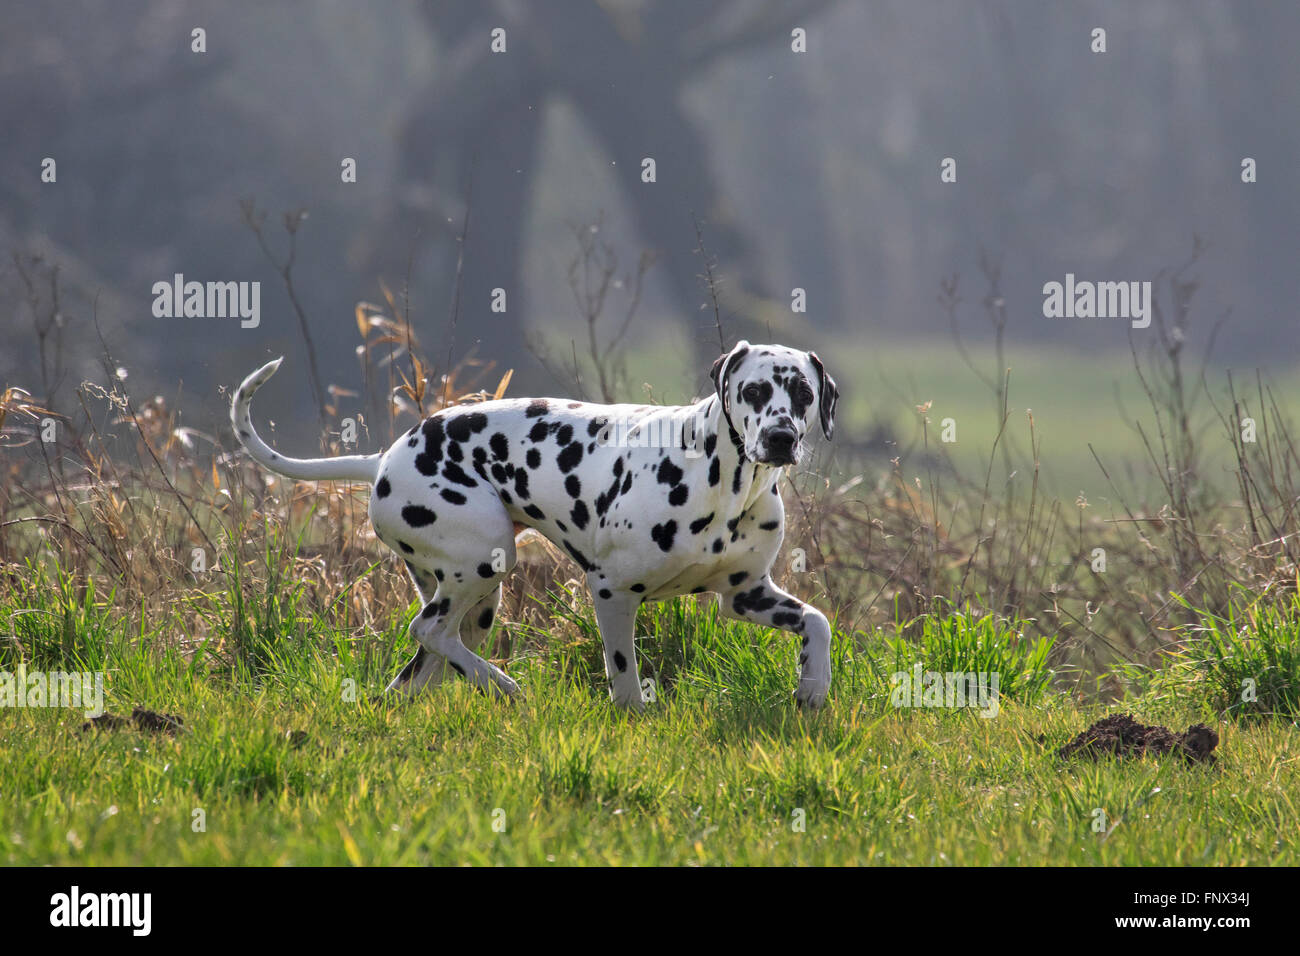 Chien dalmatien / transport / spotted coach dog walking in field Banque D'Images